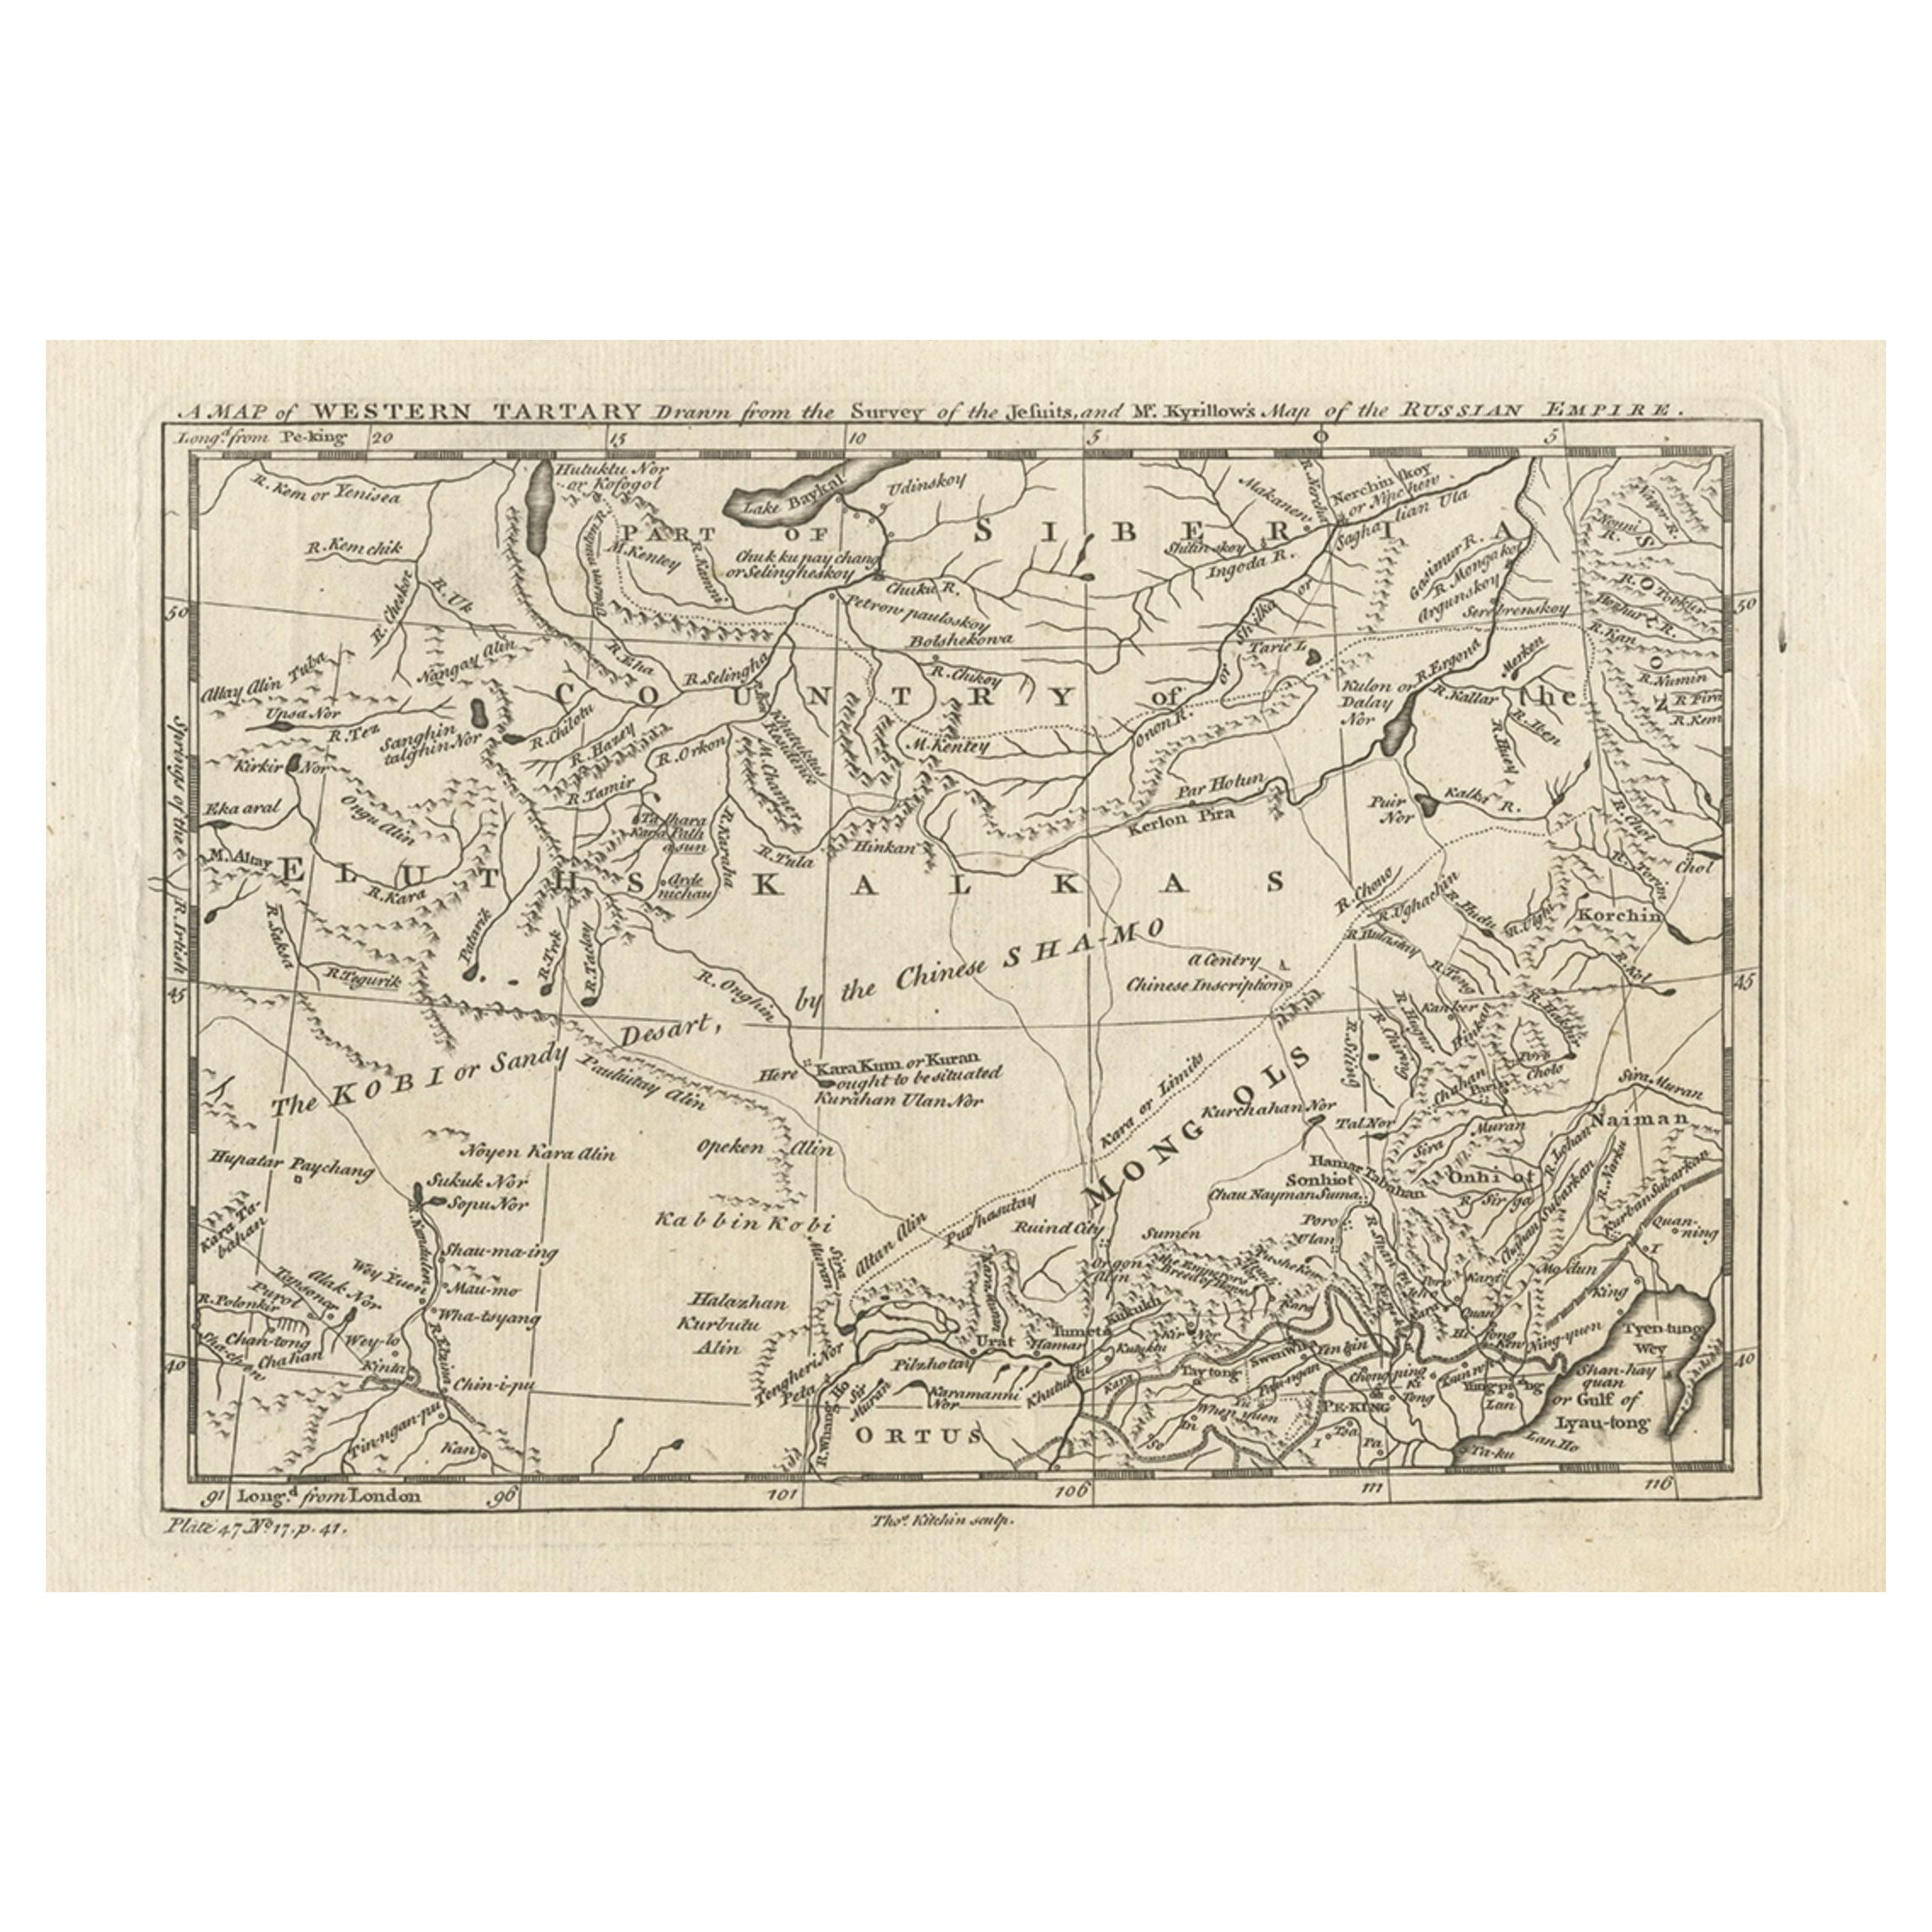 Antique Map of Western Tartary and the Gobi Desert of the Russian Empire, c.1750